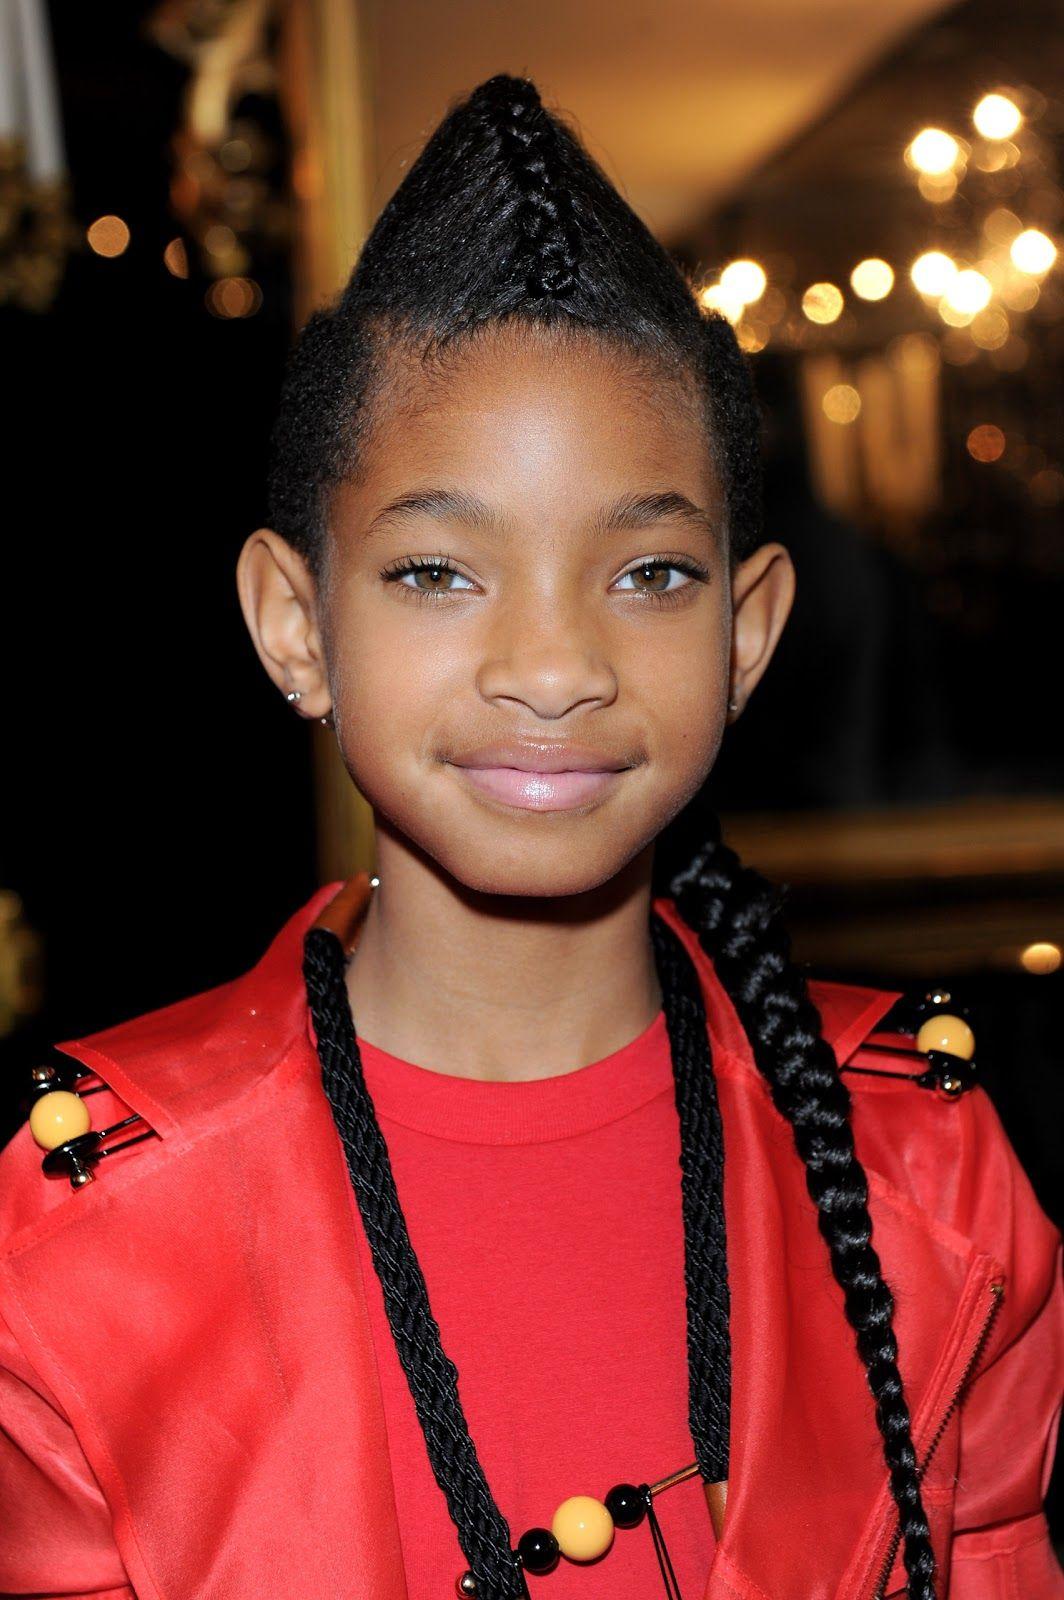 Elojar: Willow Smith Picture Gallery, Wallpaper and Videos